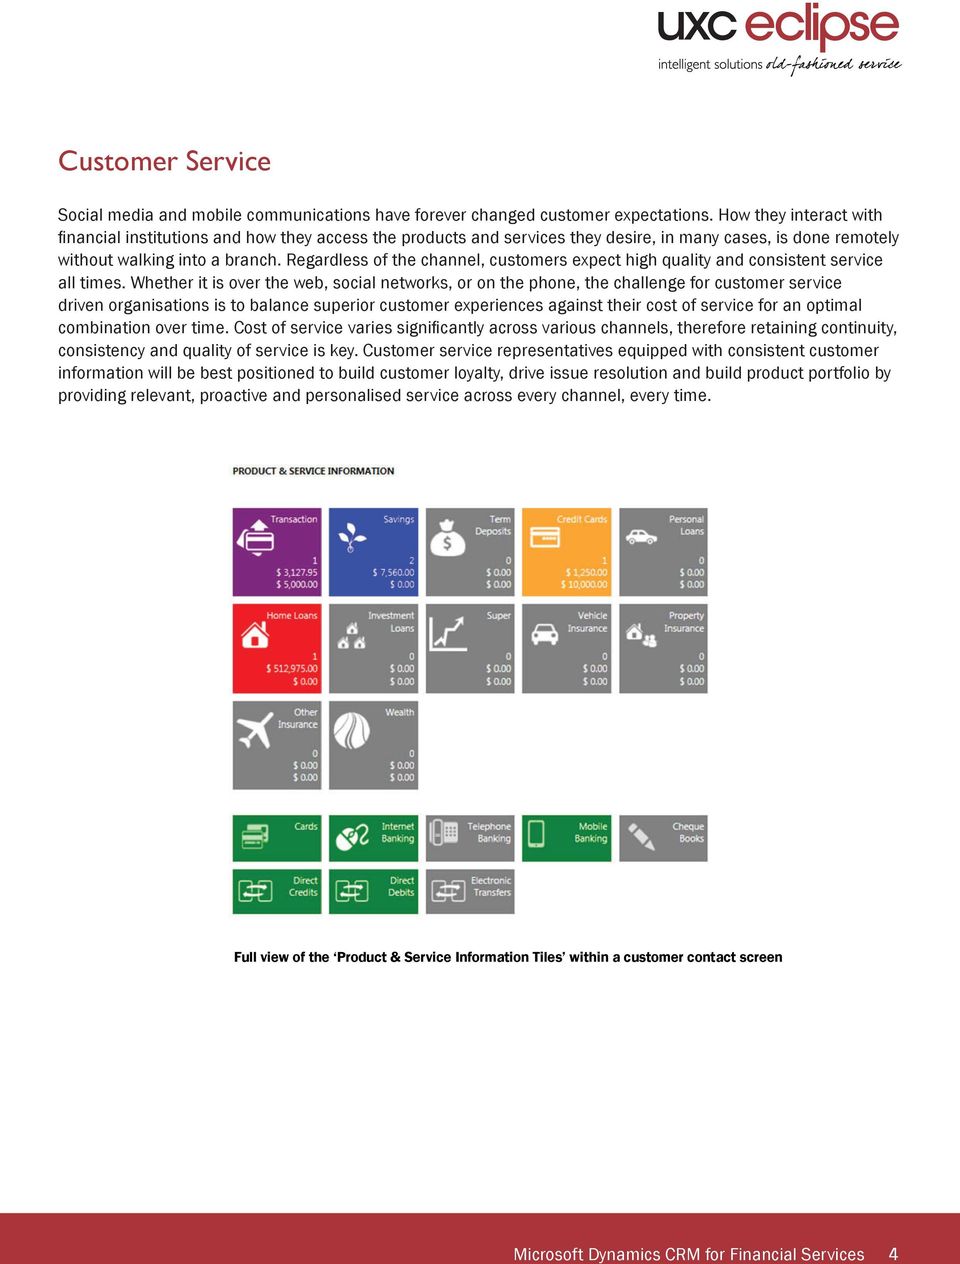 Regardless of the channel, customers expect high quality and consistent service all times.